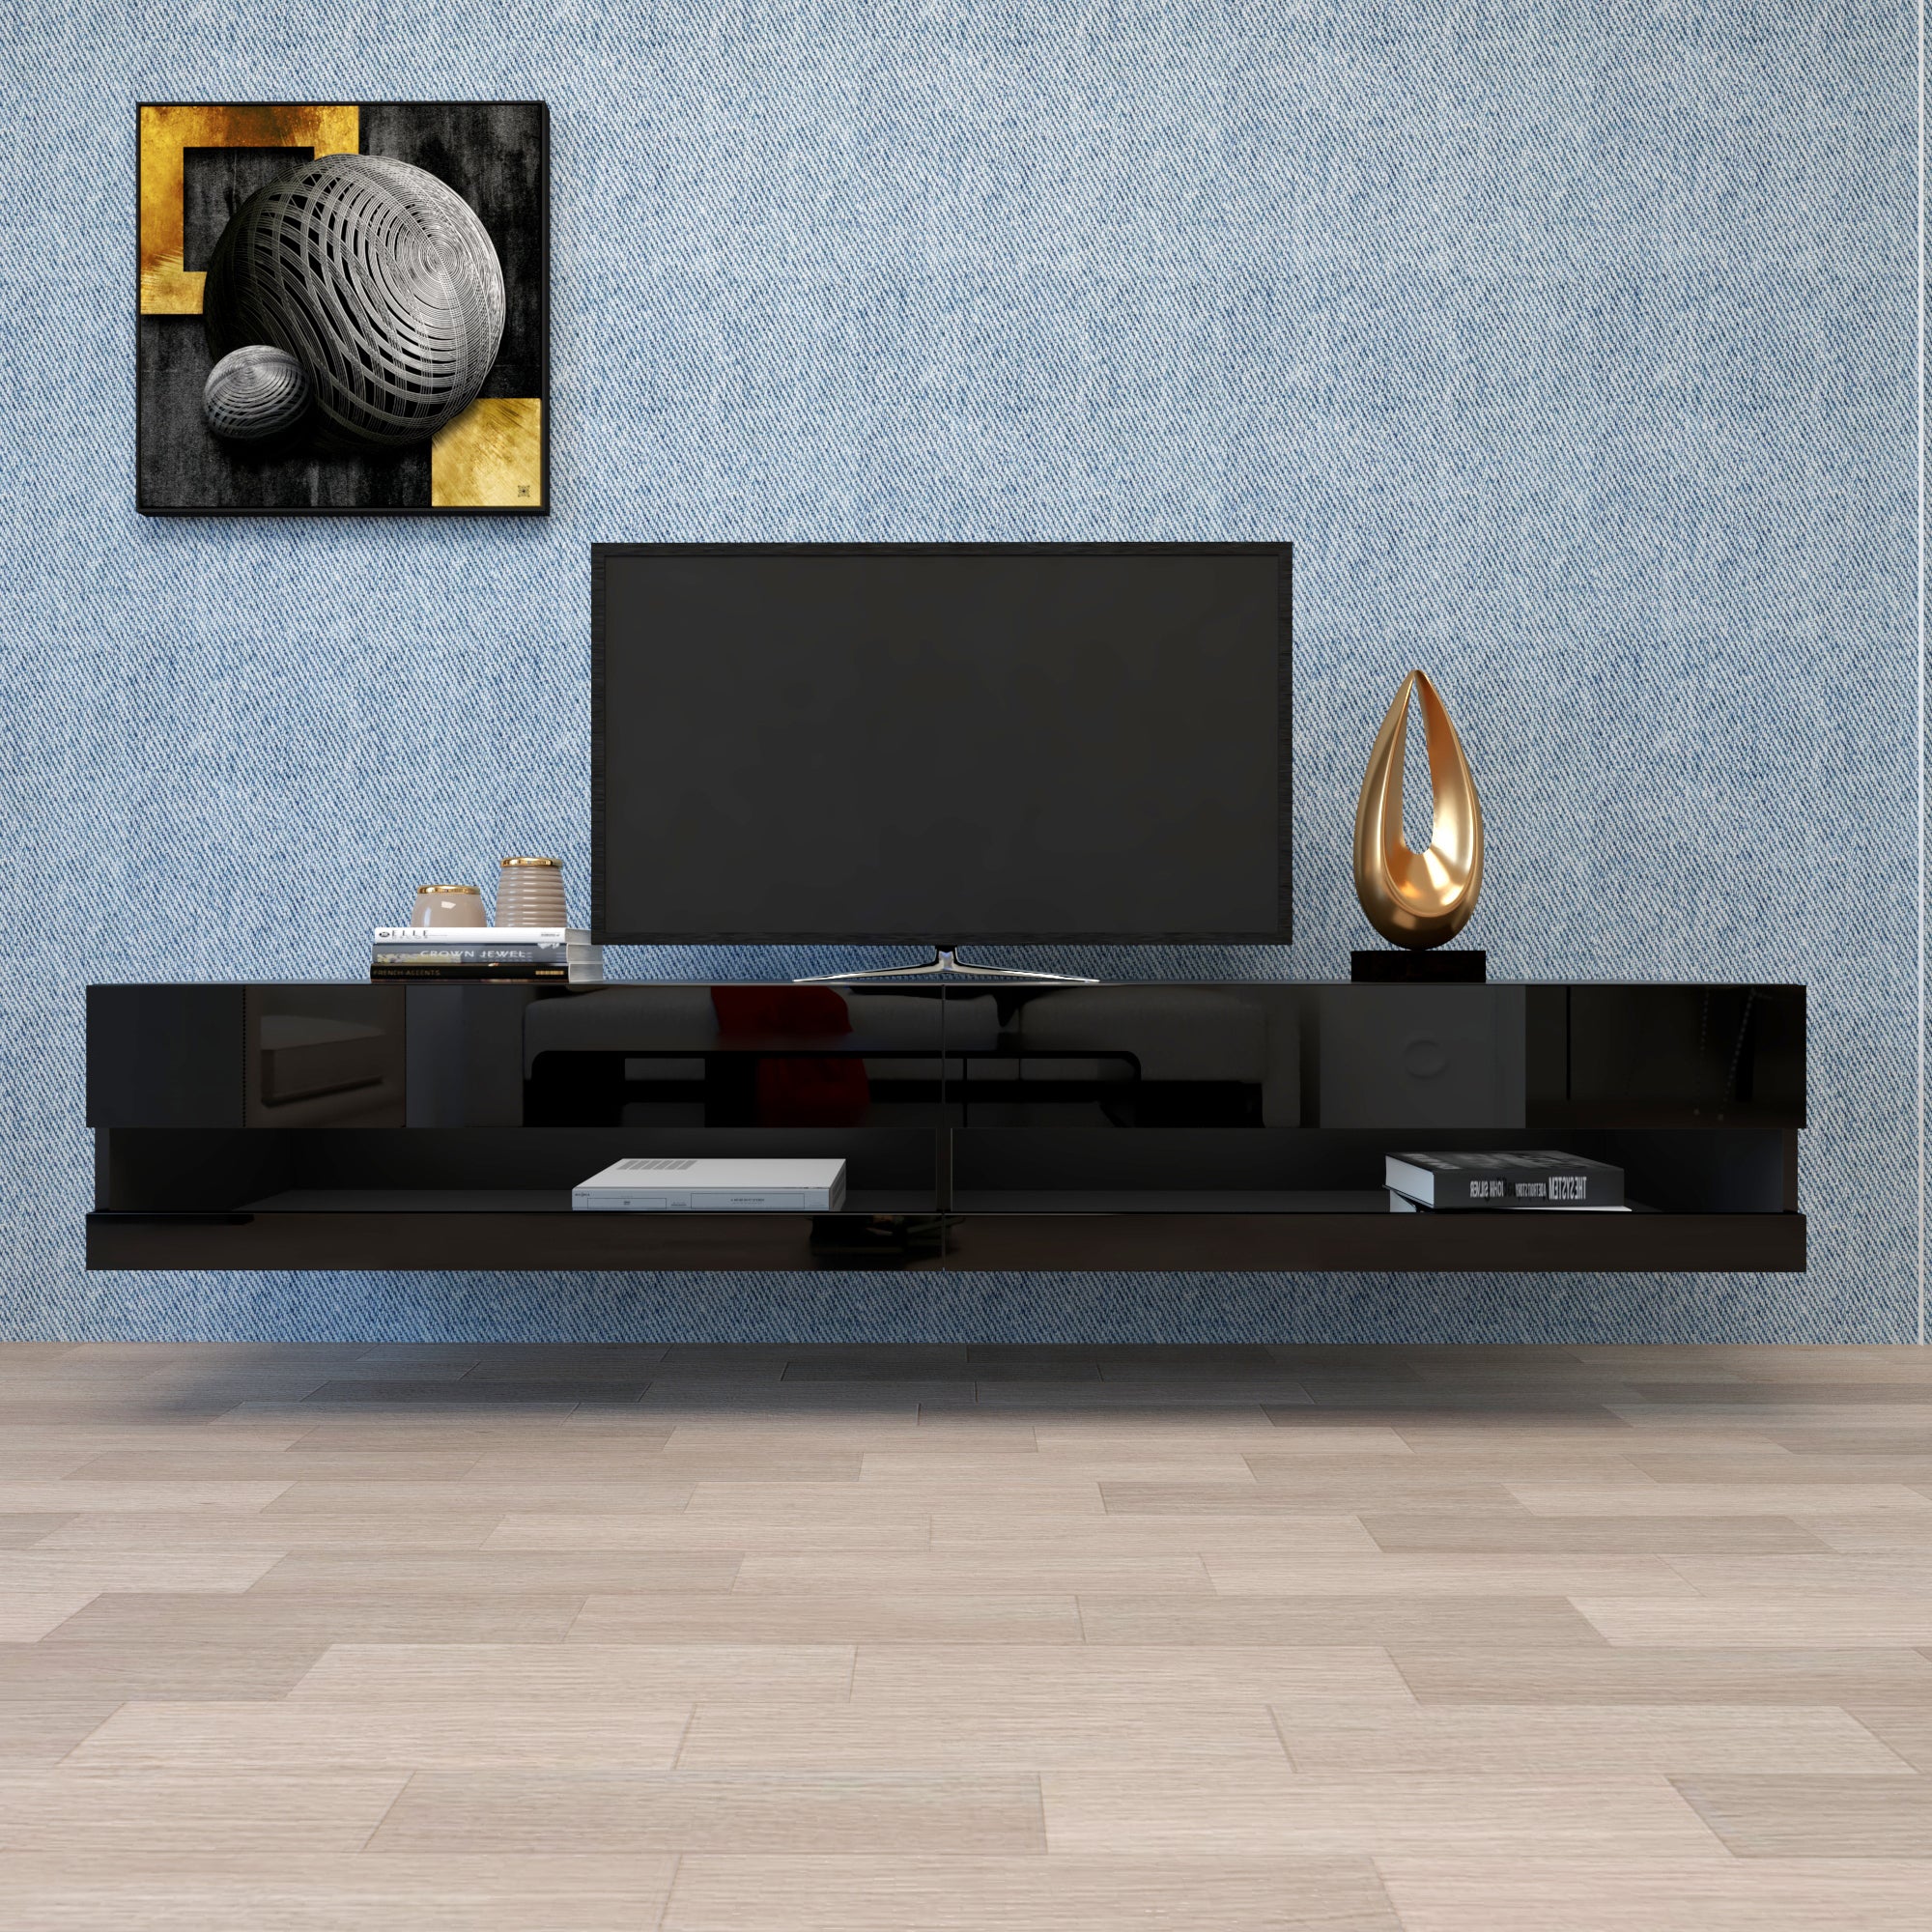 180 Wall Mount Floating 80 Inch TV Stand with Color LED (Black)